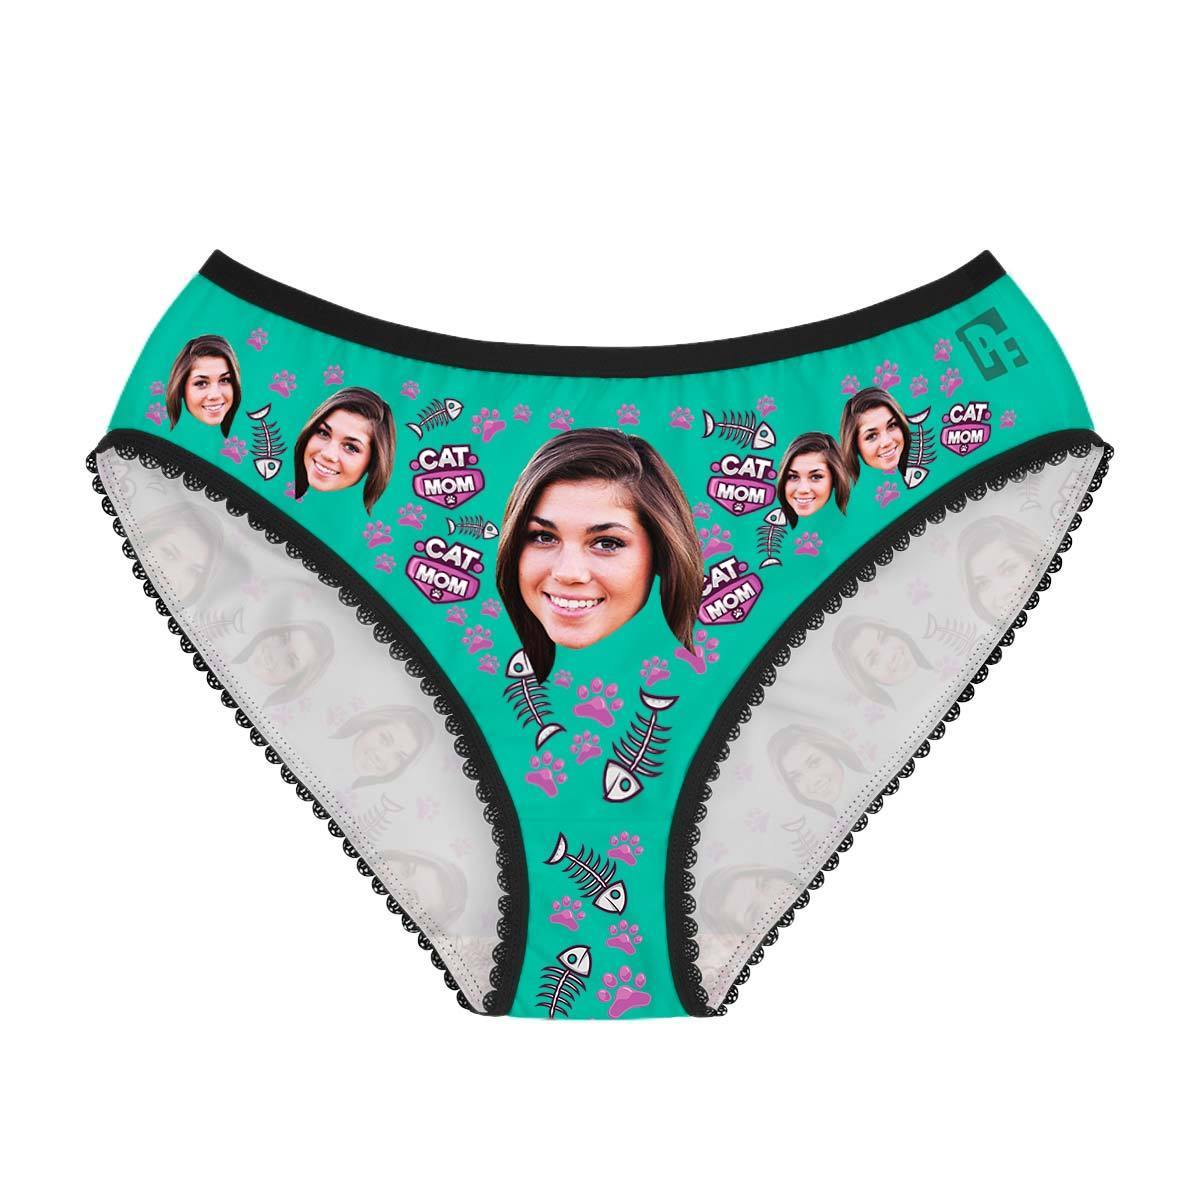 Mint Cat Mom women's underwear briefs personalized with photo printed on them